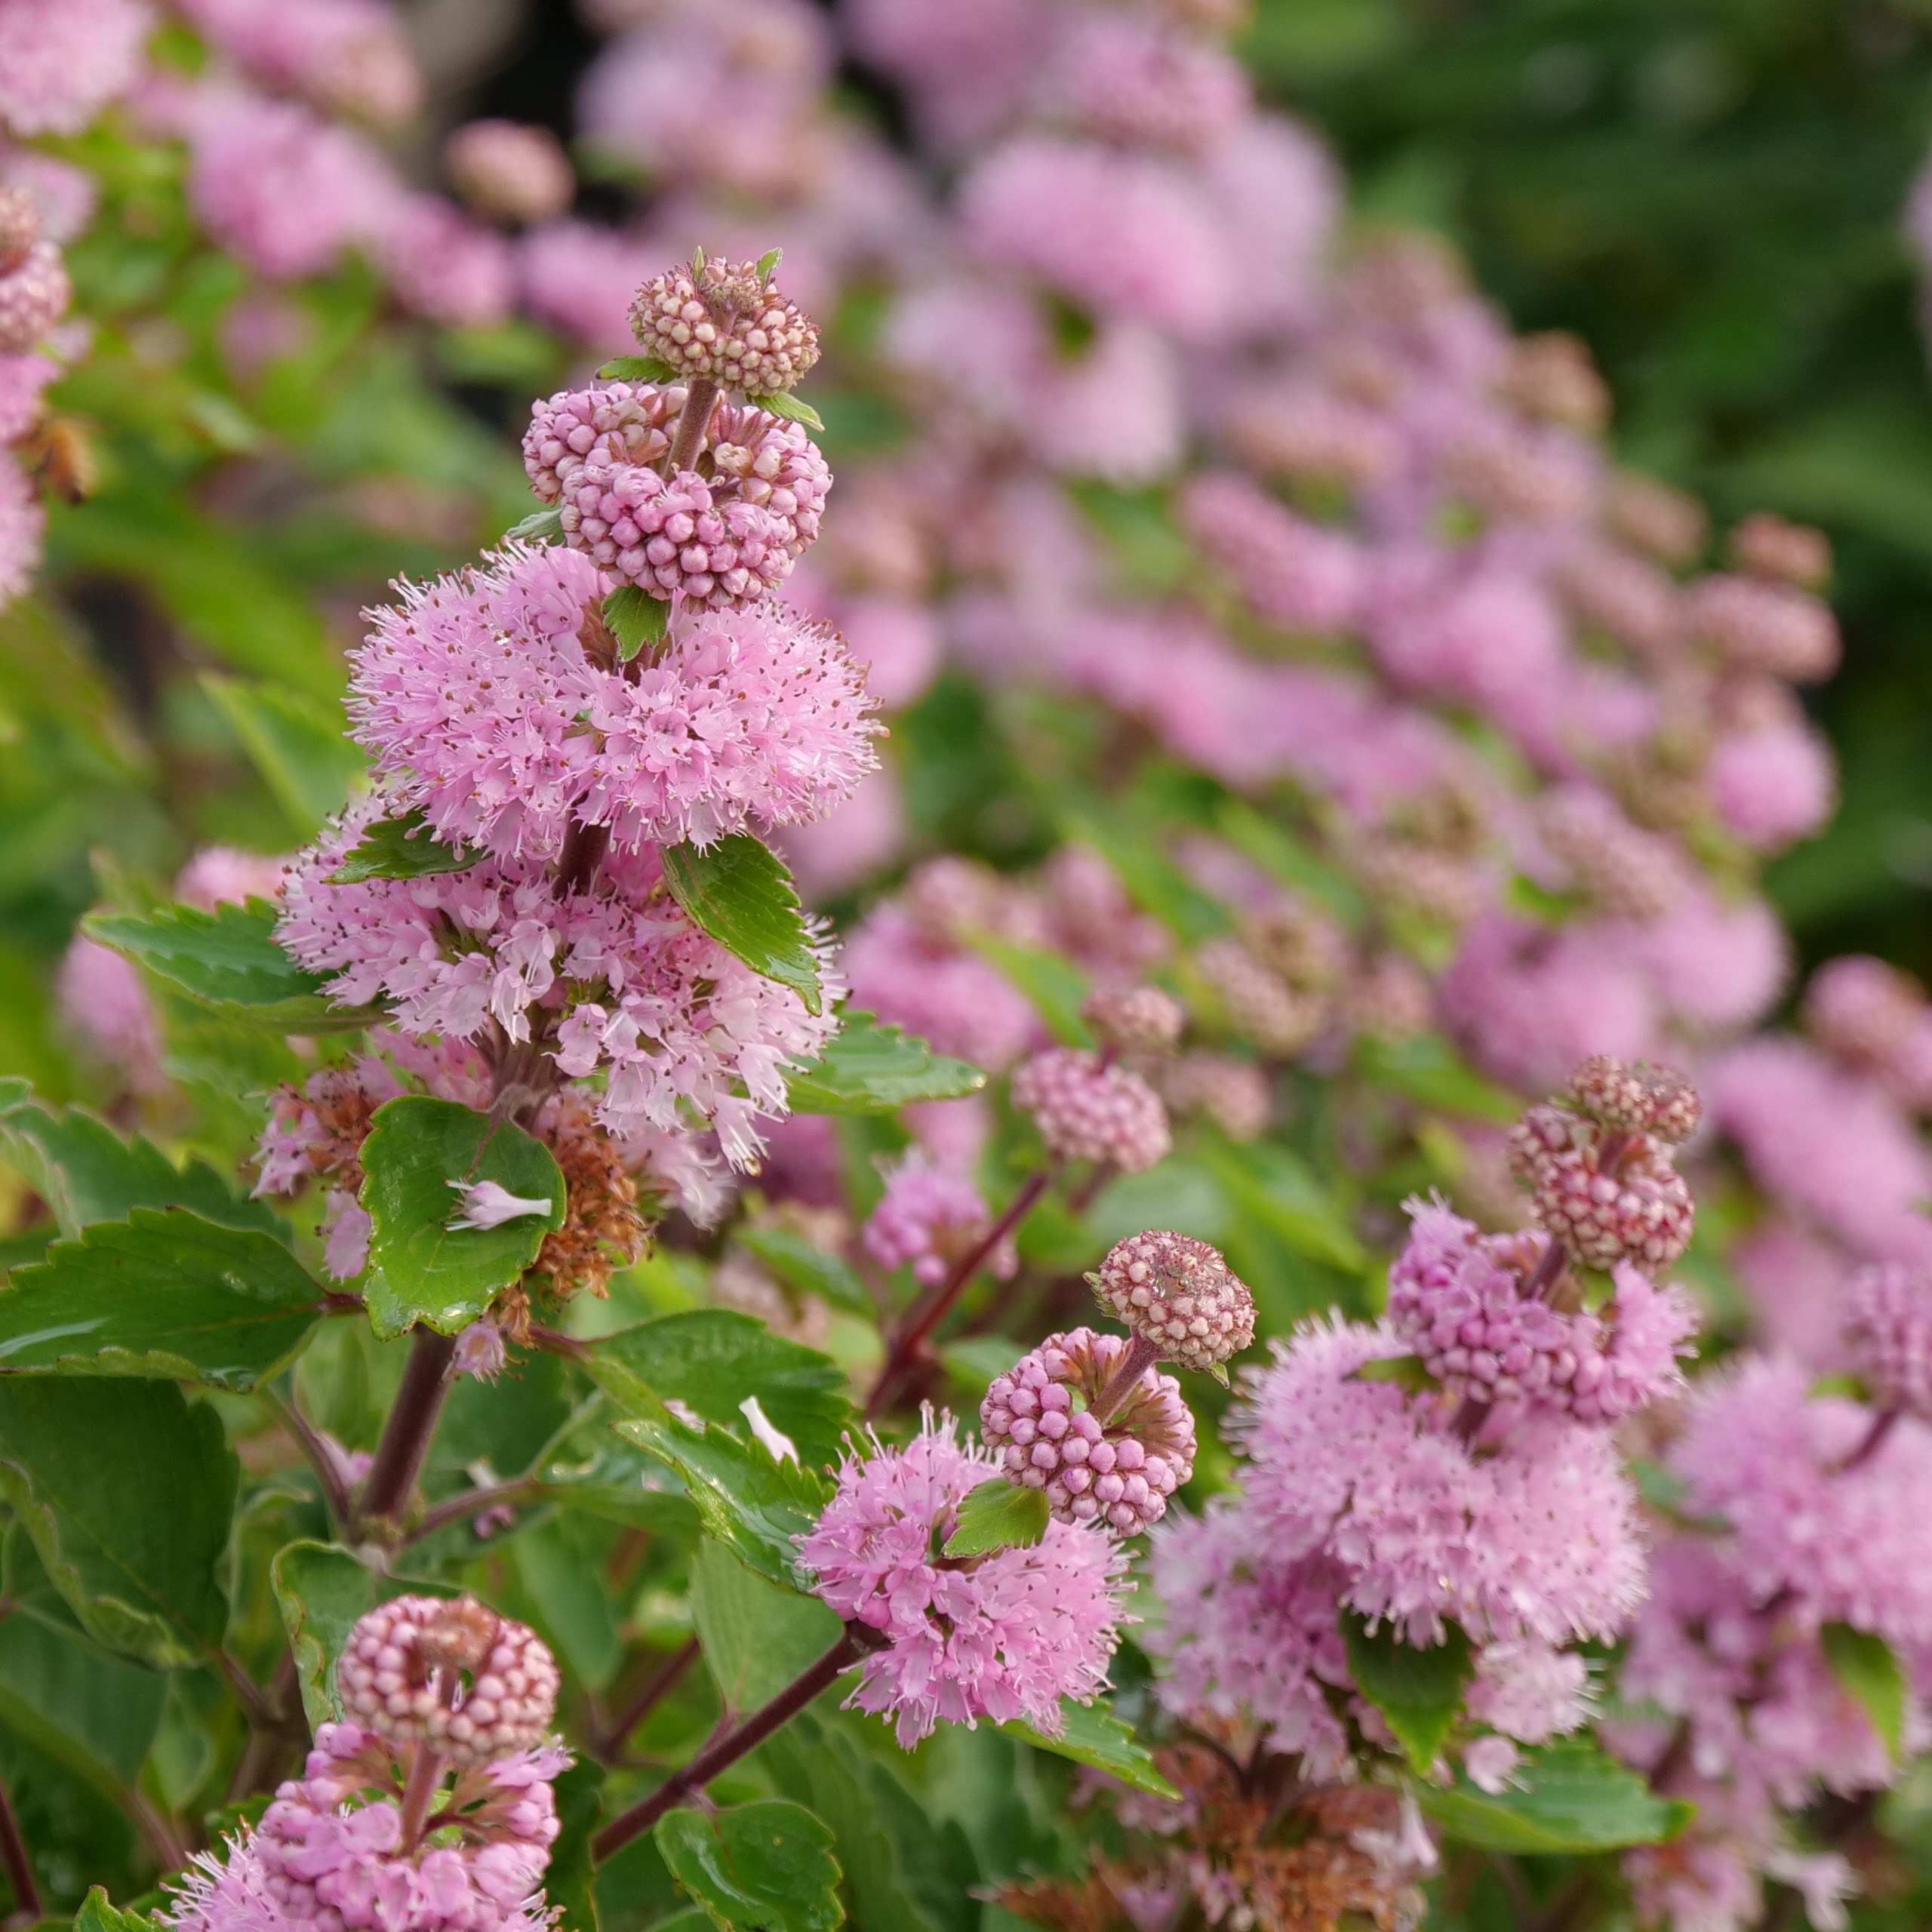 Beyond Pinkd caryopteris has pink spire like flowers and neatly toothed foliage.